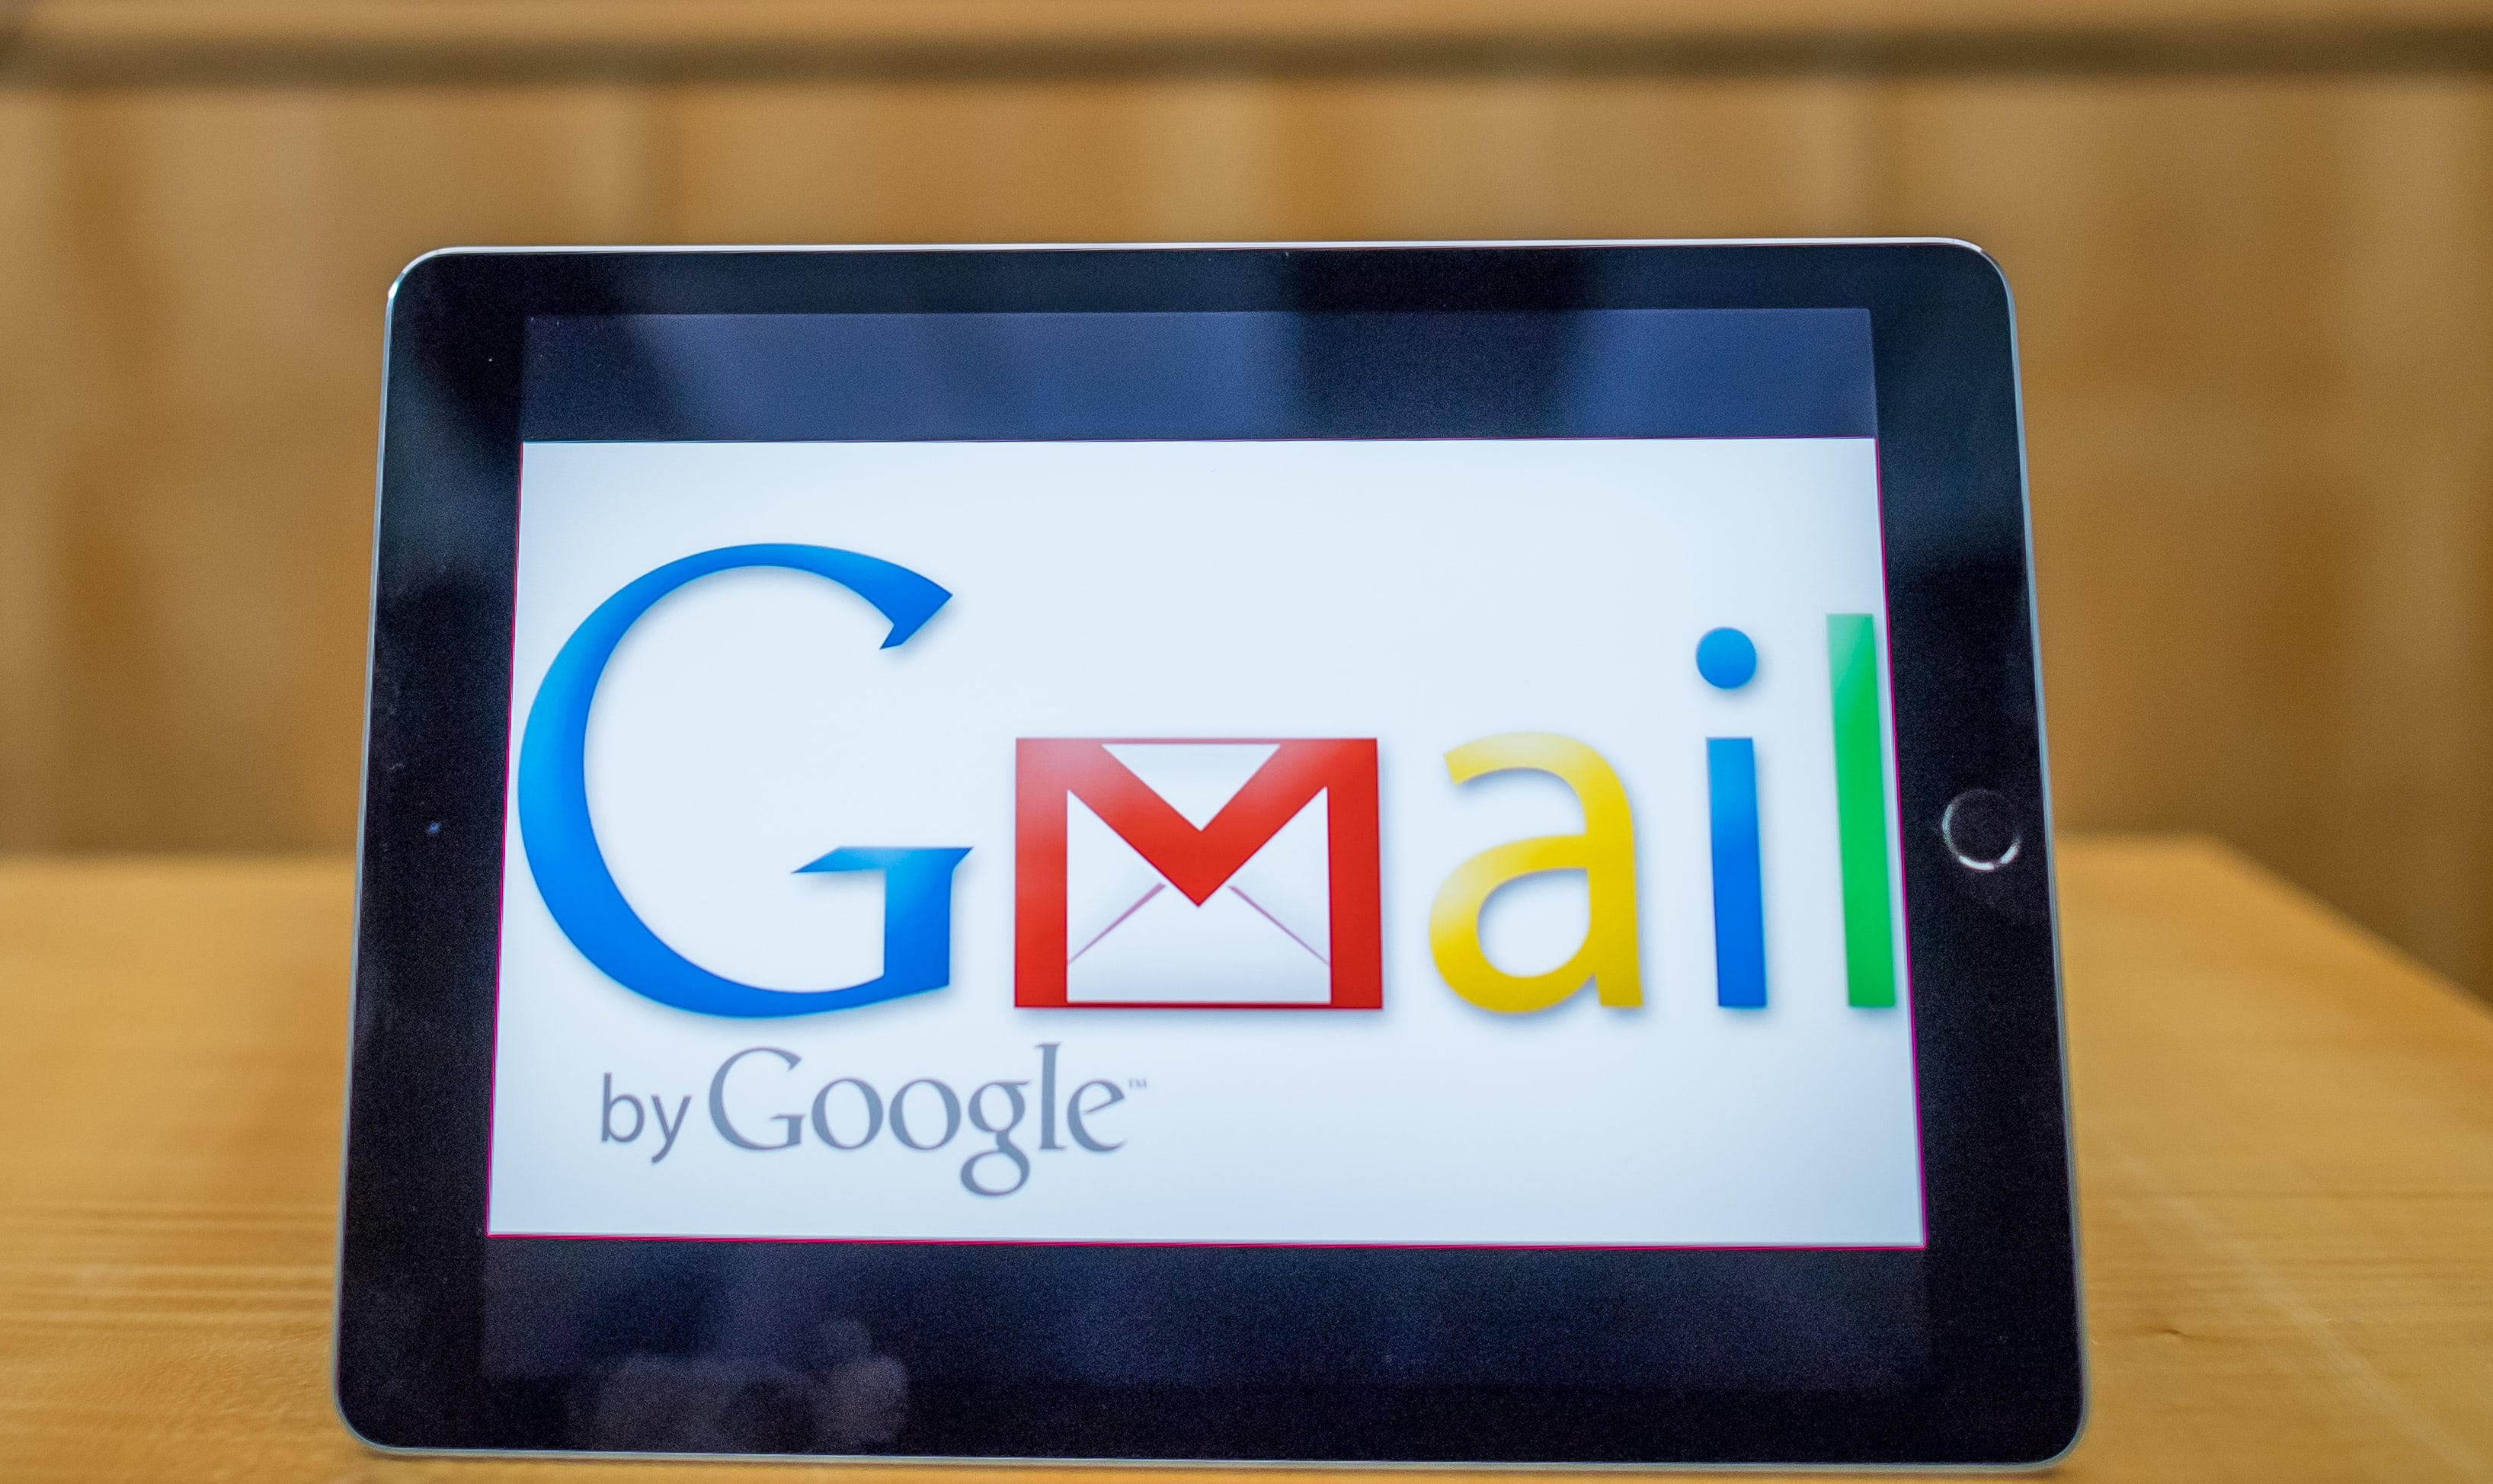 Google's gmail service has turned 15 - and now has 1.5 billion users.